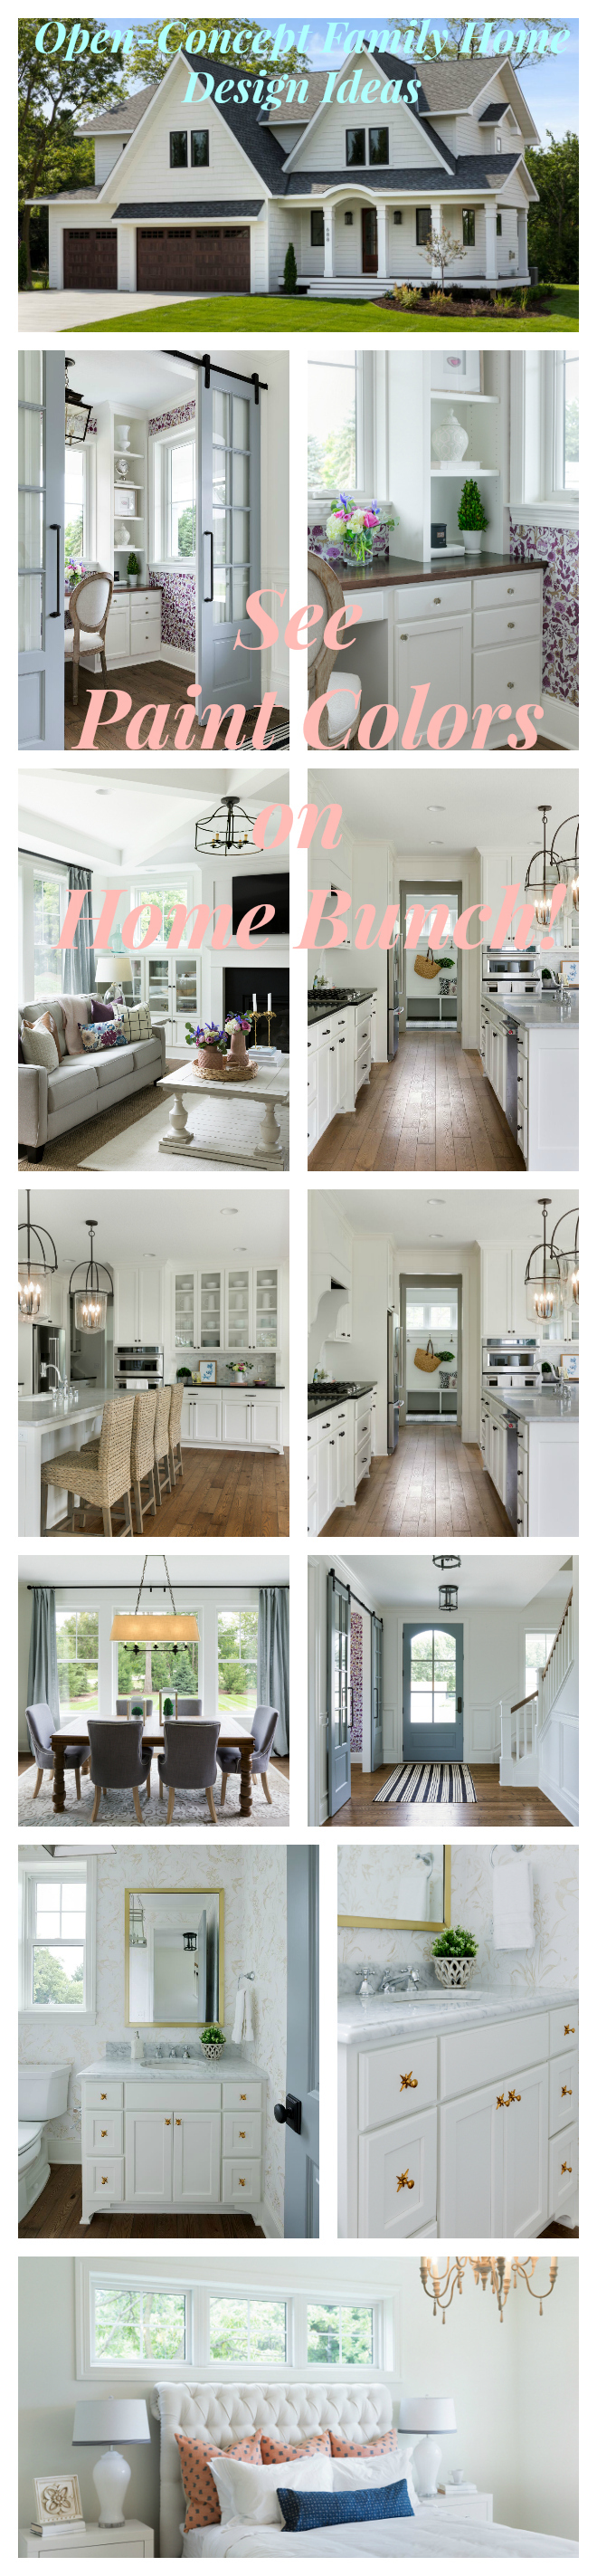 Open-Concept Family Home Design Ideas. See paint colors on Home Bunch